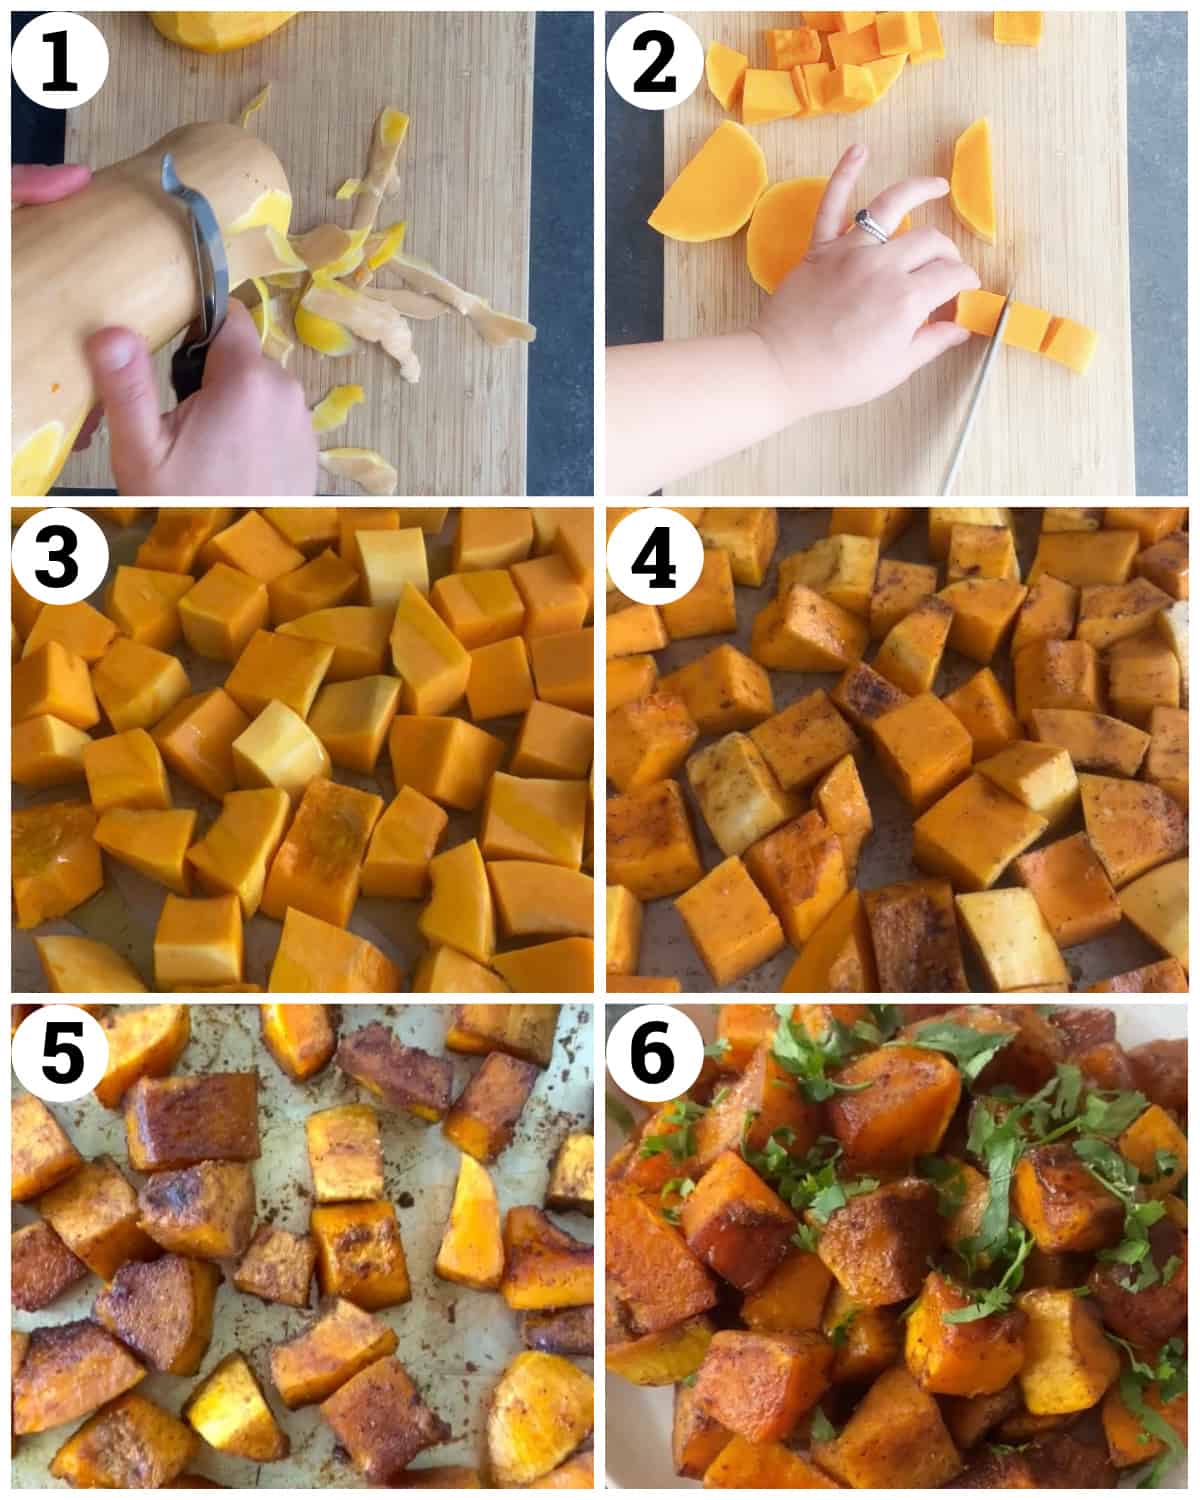 Peel, slice and cut the butternut squash into cubes then toss with olive oil and spices and roast in the oven. 